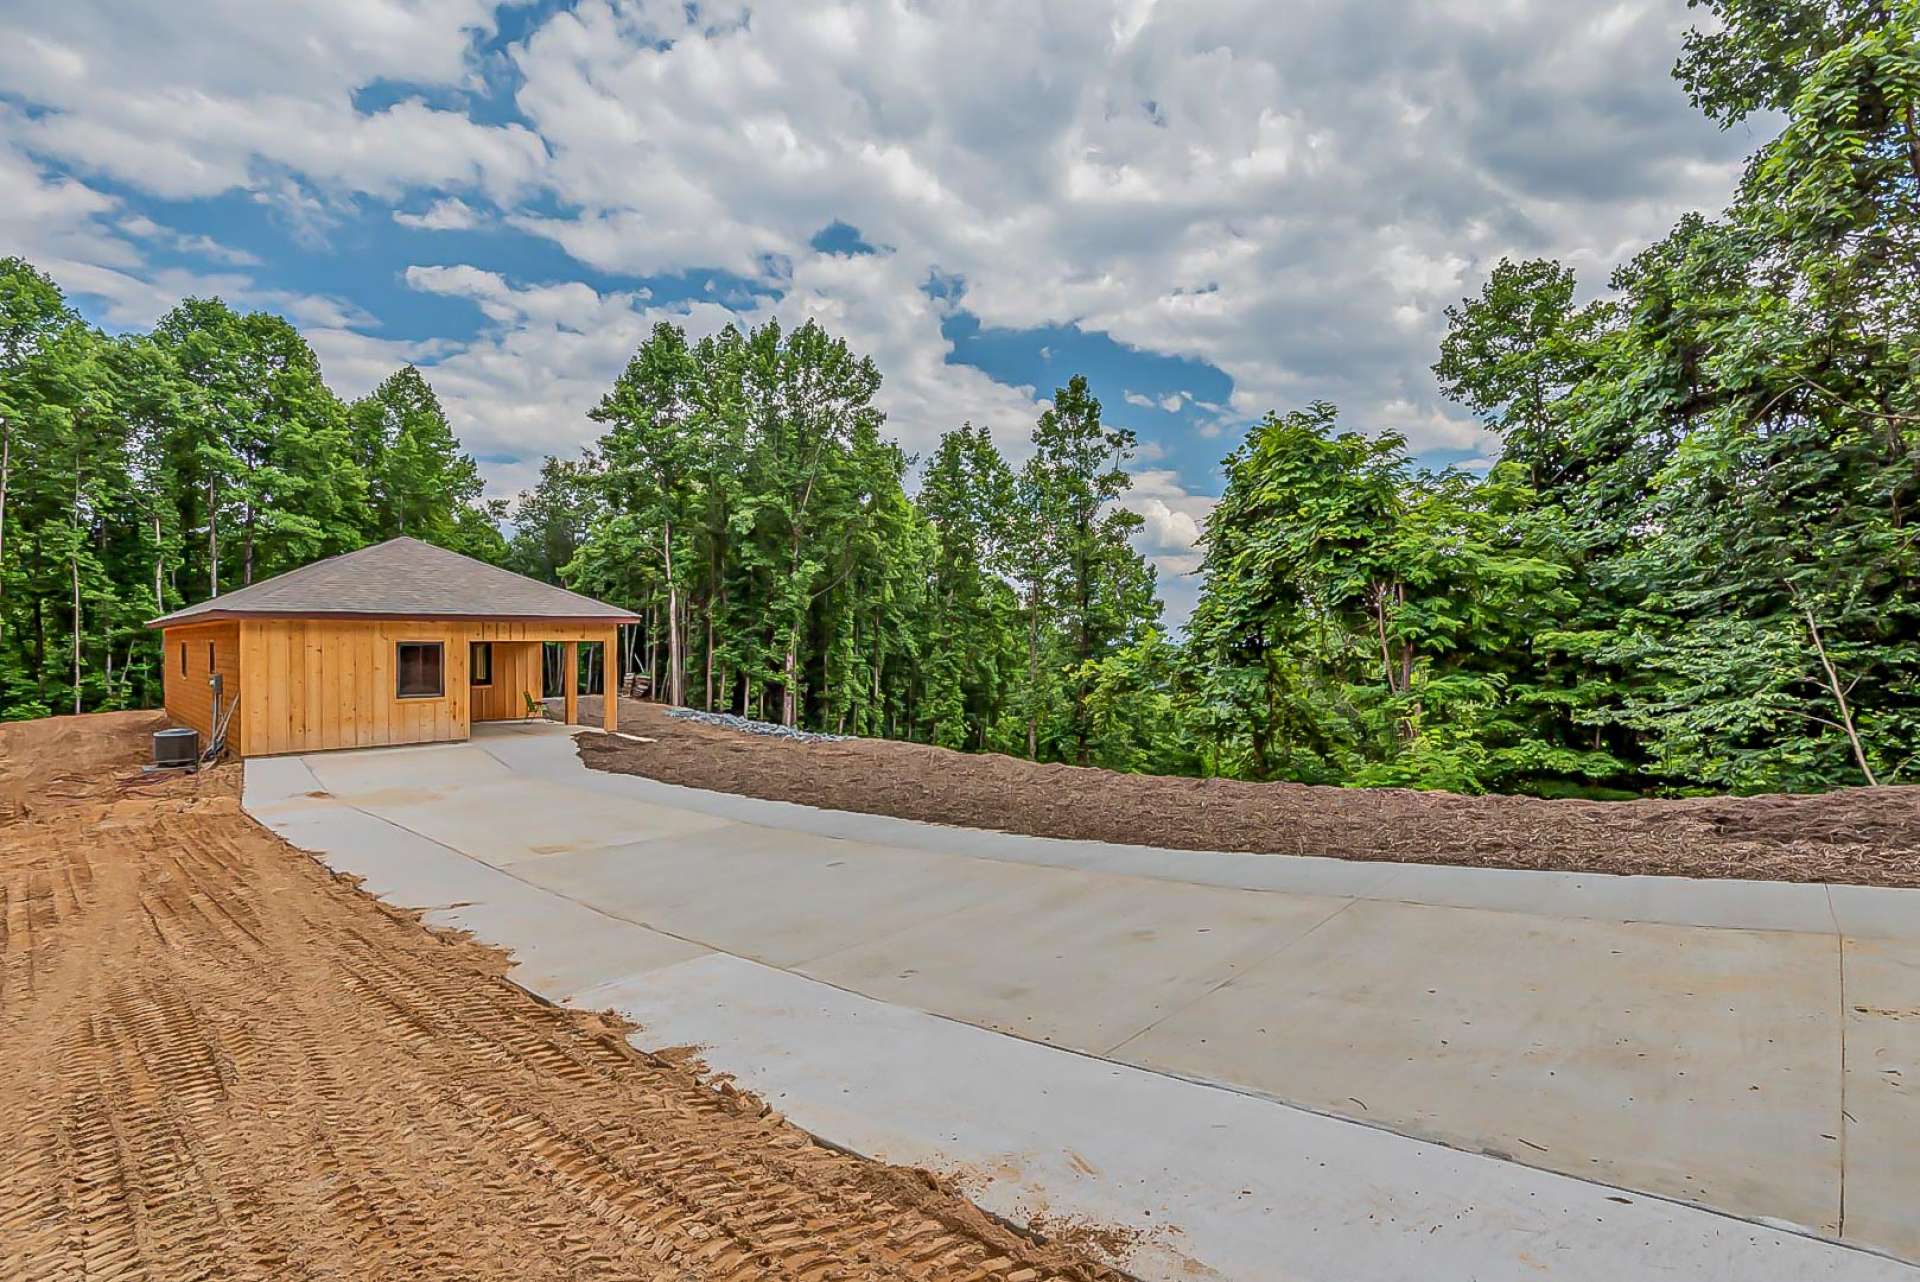 This property offers a paved drive into a private 3 acre setting.